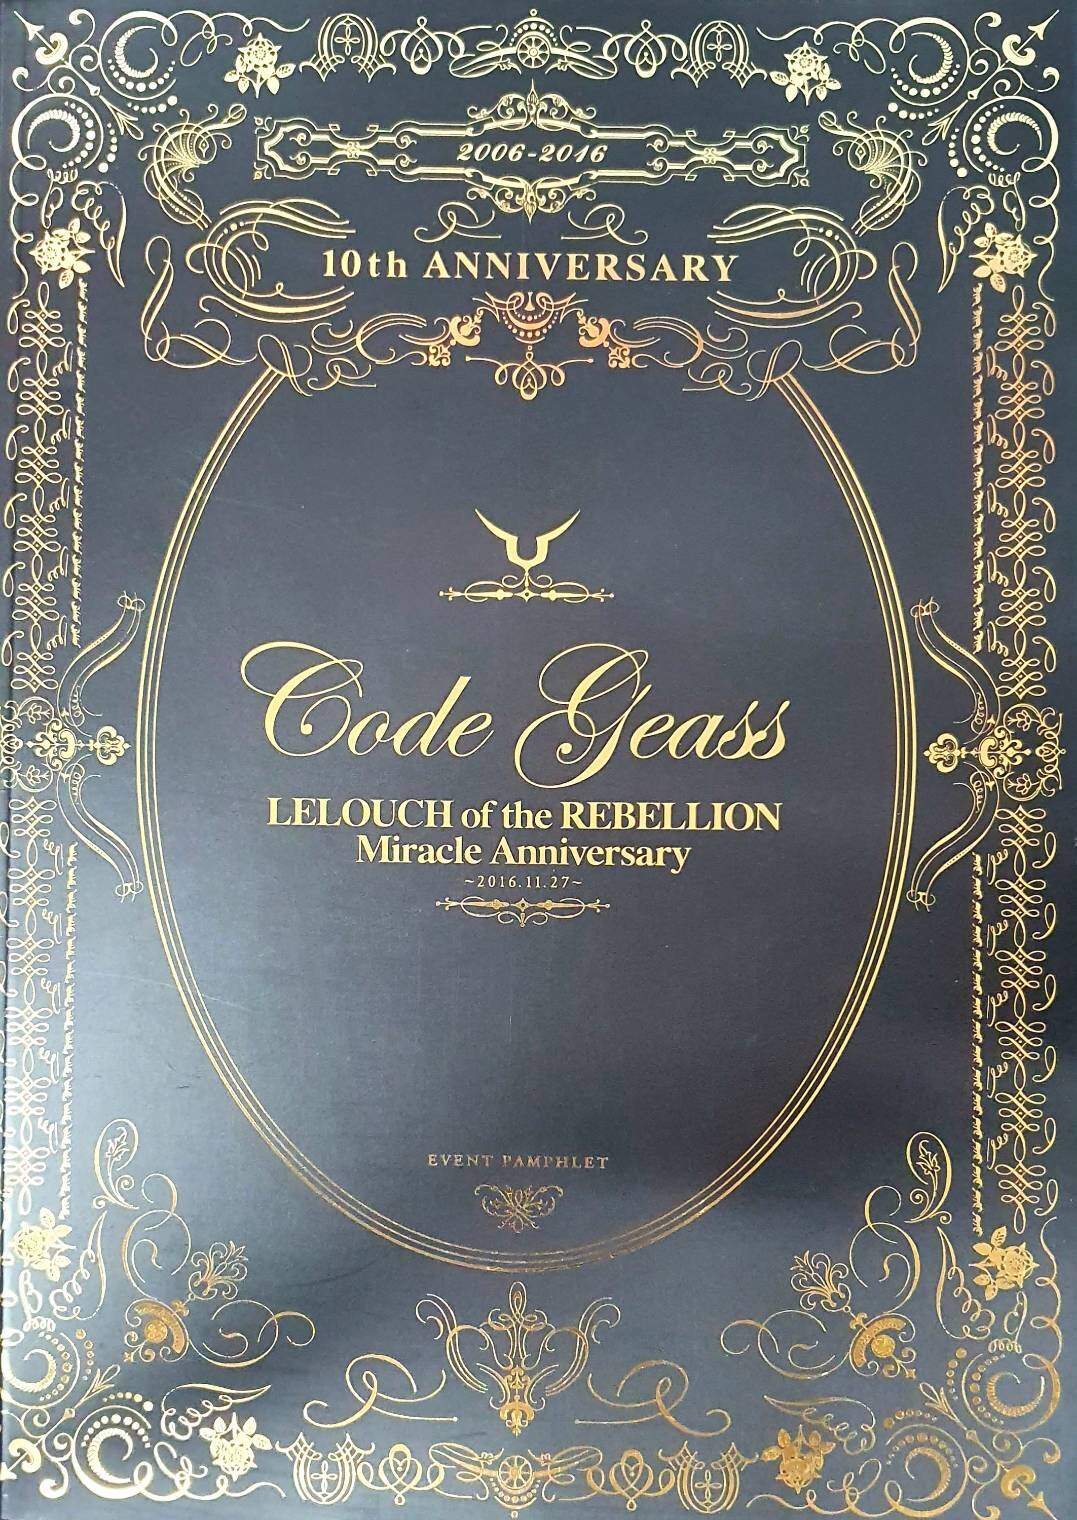 (BOOK) CODE GEASS – LELOUCH OF THE REBELLION MIRACLE ANNIVERSARY EVENT PAMPHLET